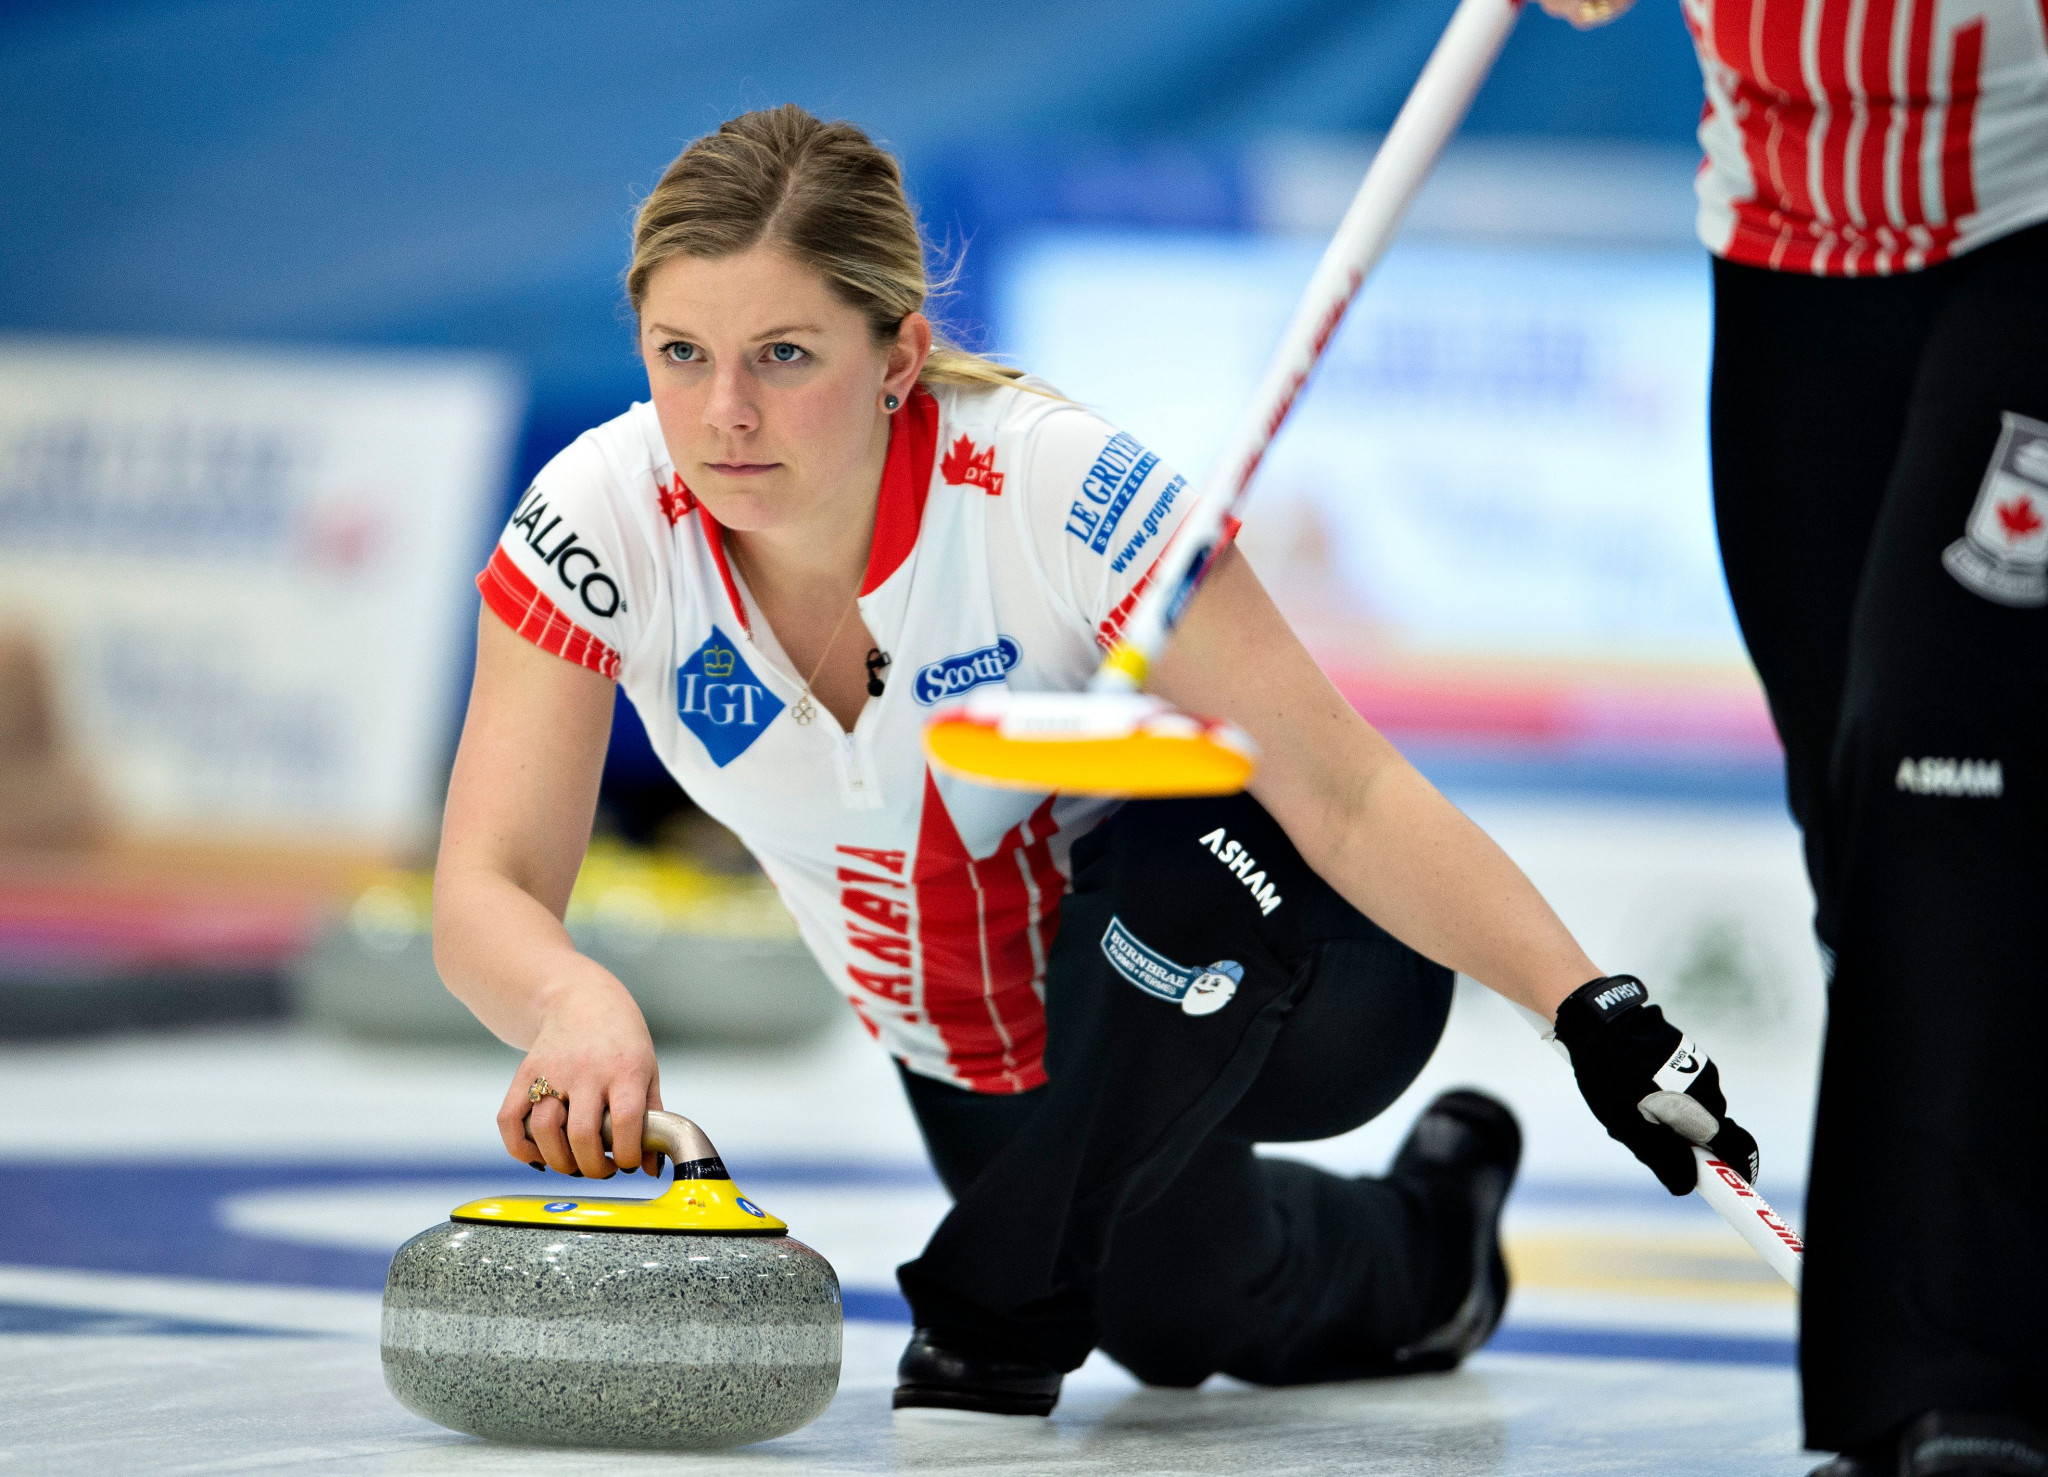 Curling Canada had to cancel a number of events as a result of the COVID-19 pandemic ©Getty Images